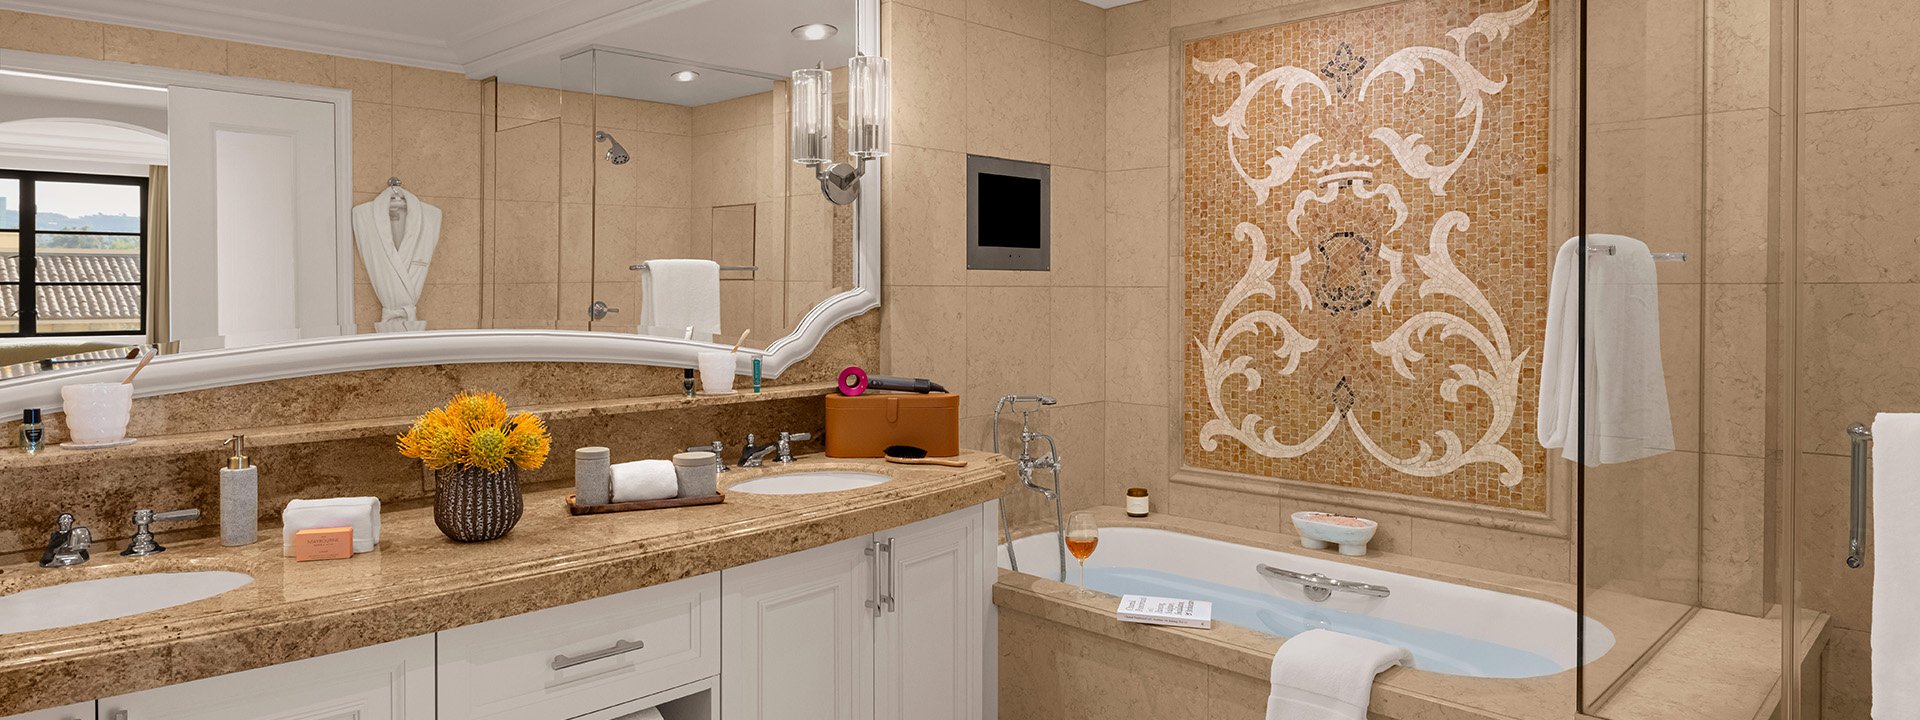 The bathroom of a hotel room with two sinks and a large bathtub. There is a mosaic wall above the bath tub.